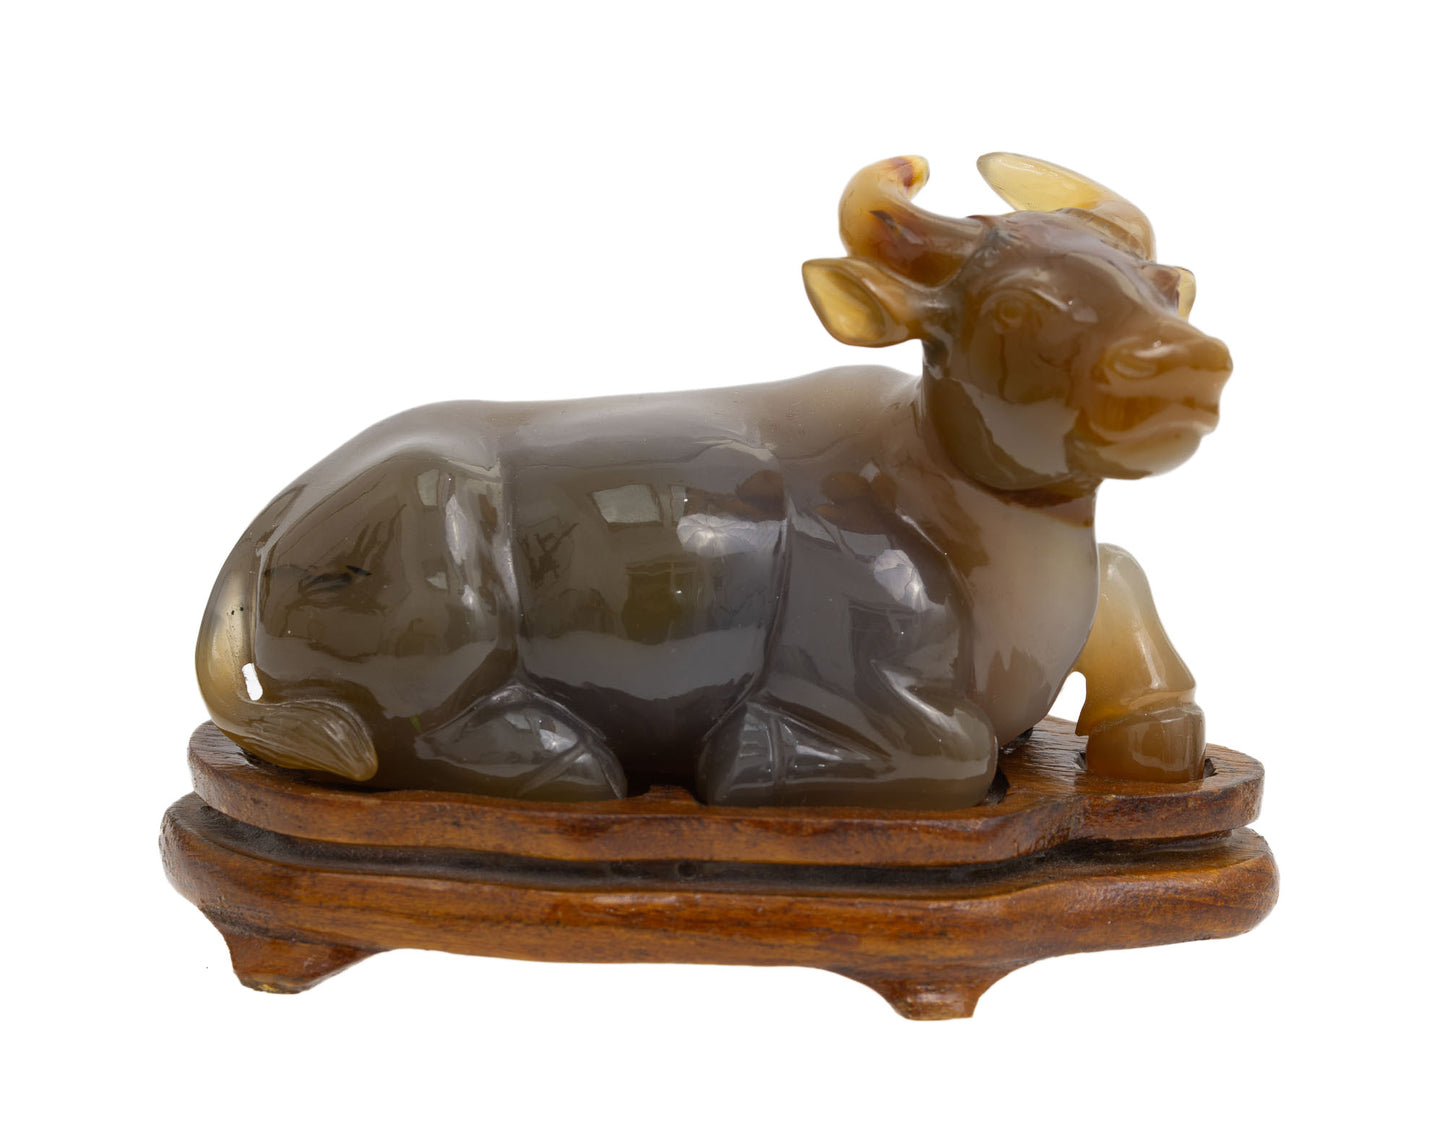 Chinese Republic Period Carved Chalcedony/Agate Figure of a Water Buffalo Lying (2932)